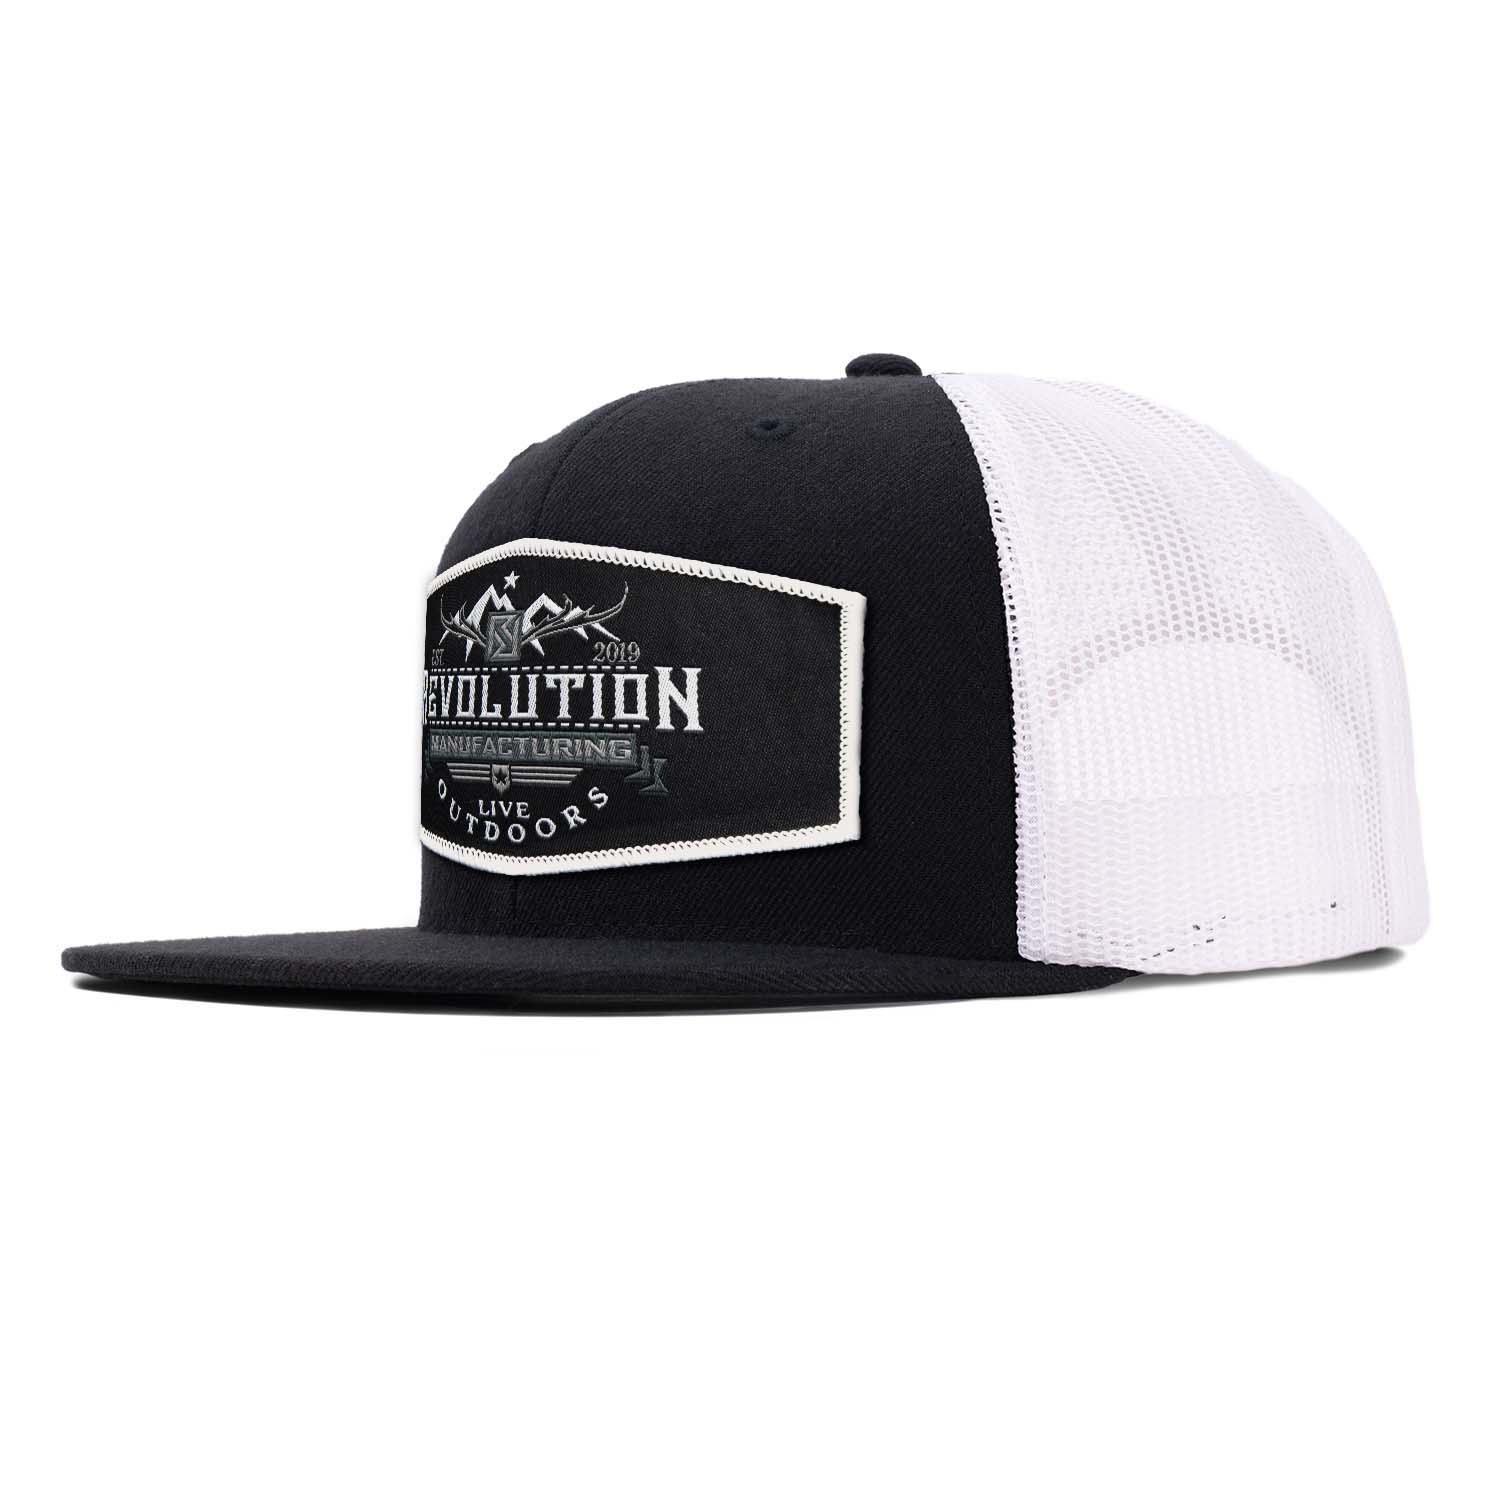 Classic flat bill trucker hat in black with white mesh with a black with white border Revolution Mfg Live Outdoors woven patch